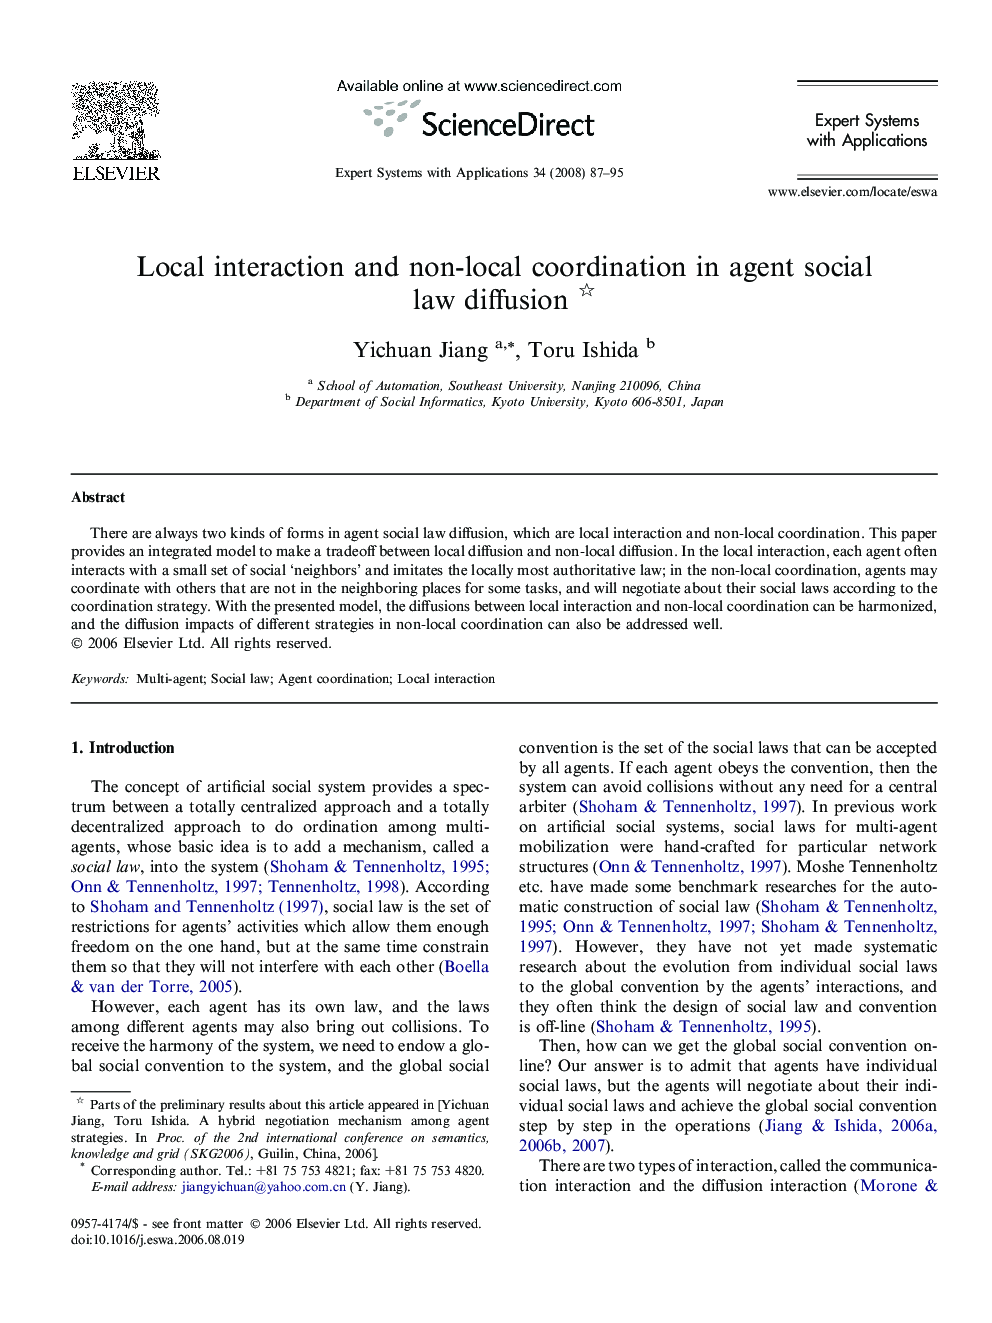 Local interaction and non-local coordination in agent social law diffusion 